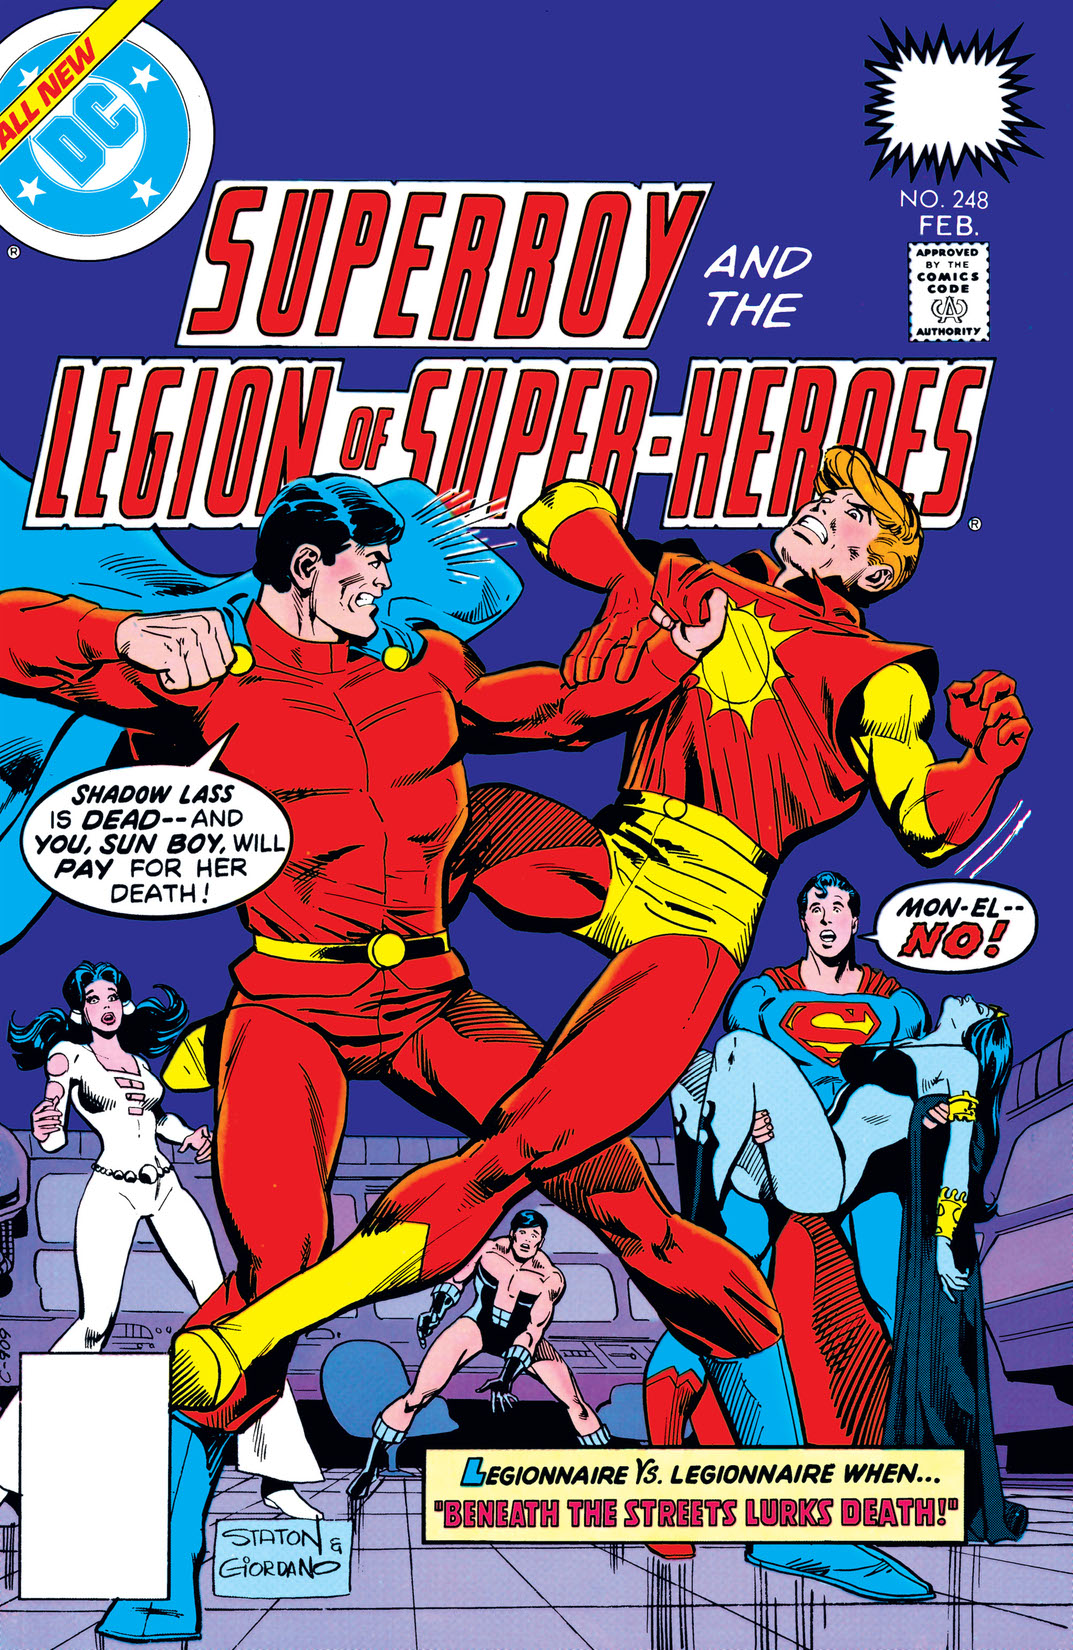 Superboy and the Legion of Super-Heroes (1977-) #248 preview images